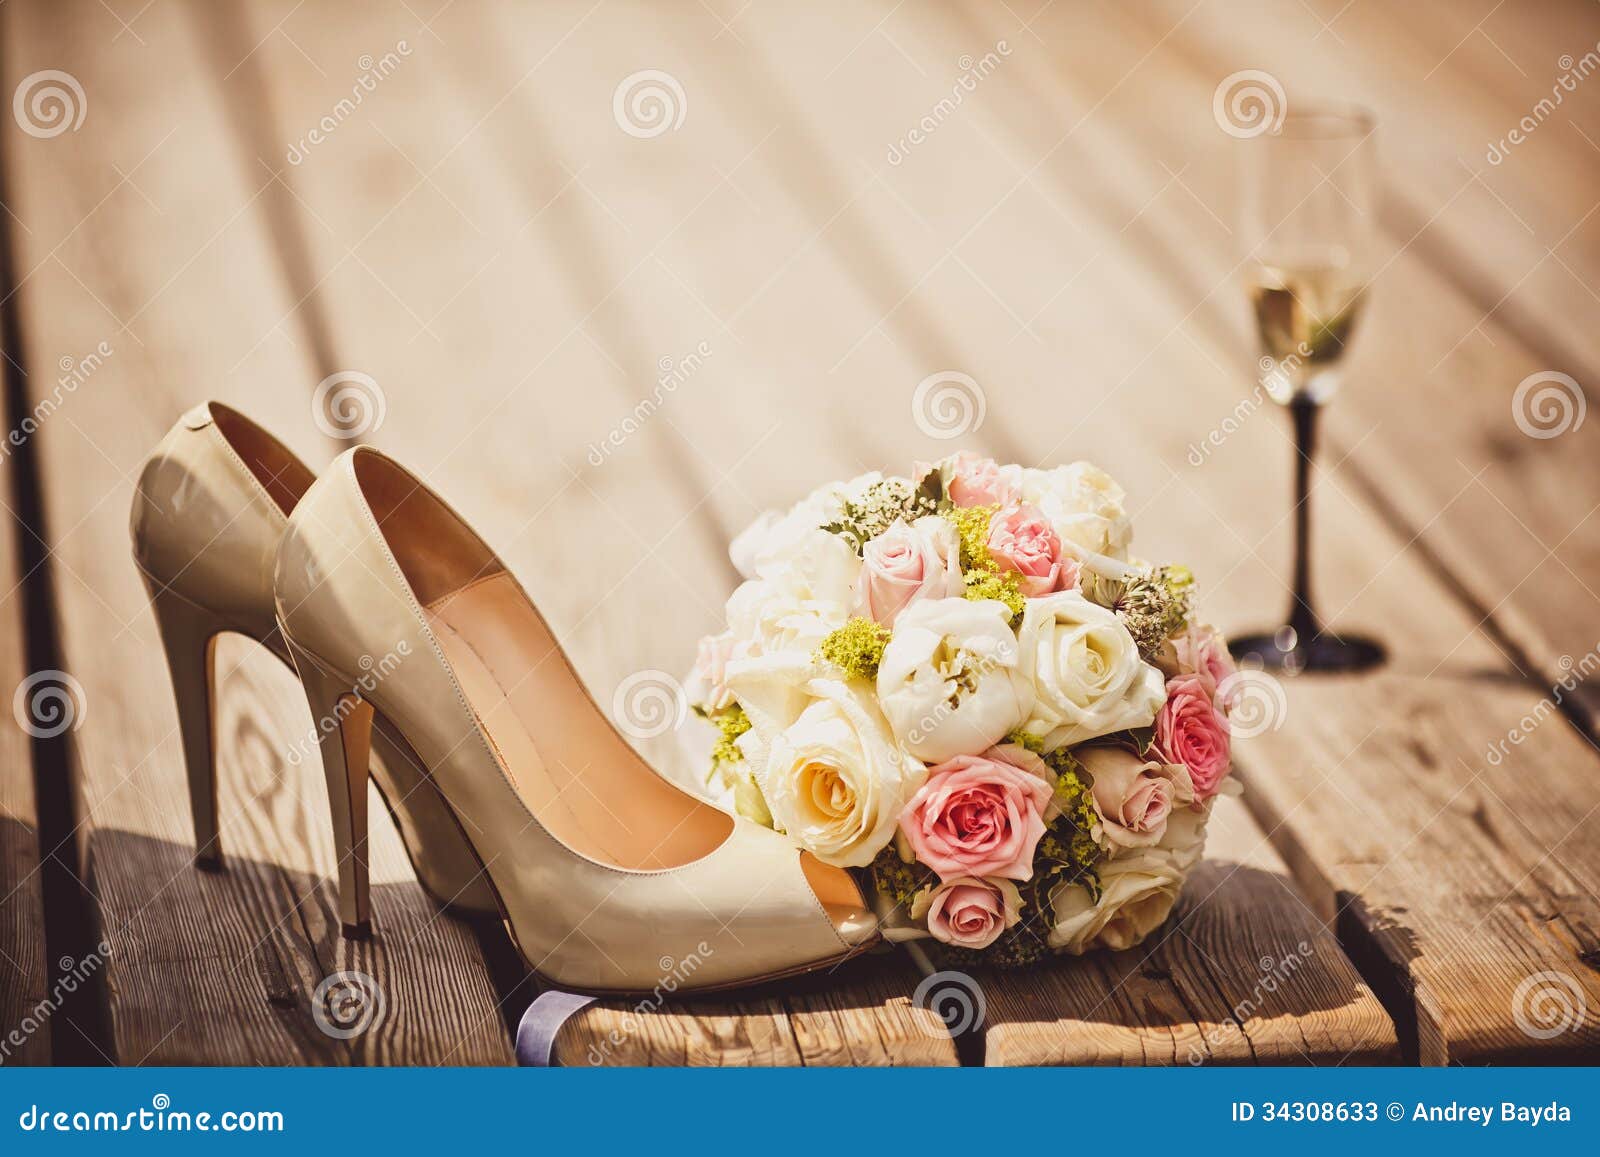 wedding bouquet and bride shoes